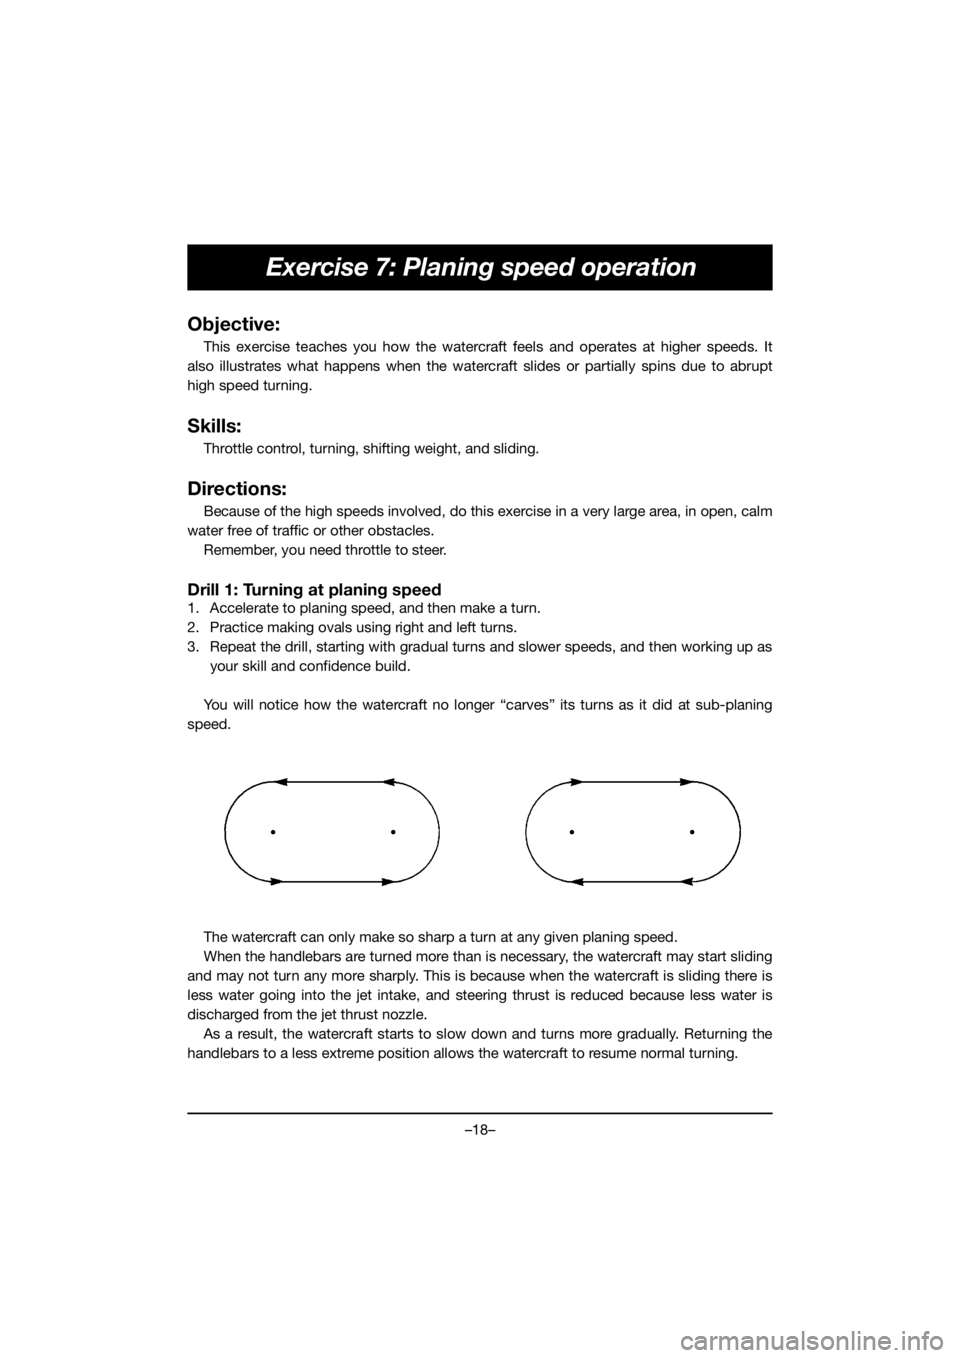 YAMAHA EX SPORT 2020  Owners Manual –18–
Exercise 7: Planing speed operation 
Objective:
This exercise teaches you how the watercraft feels and operates at higher speeds. It
also illustrates what happens when the watercraft slides o